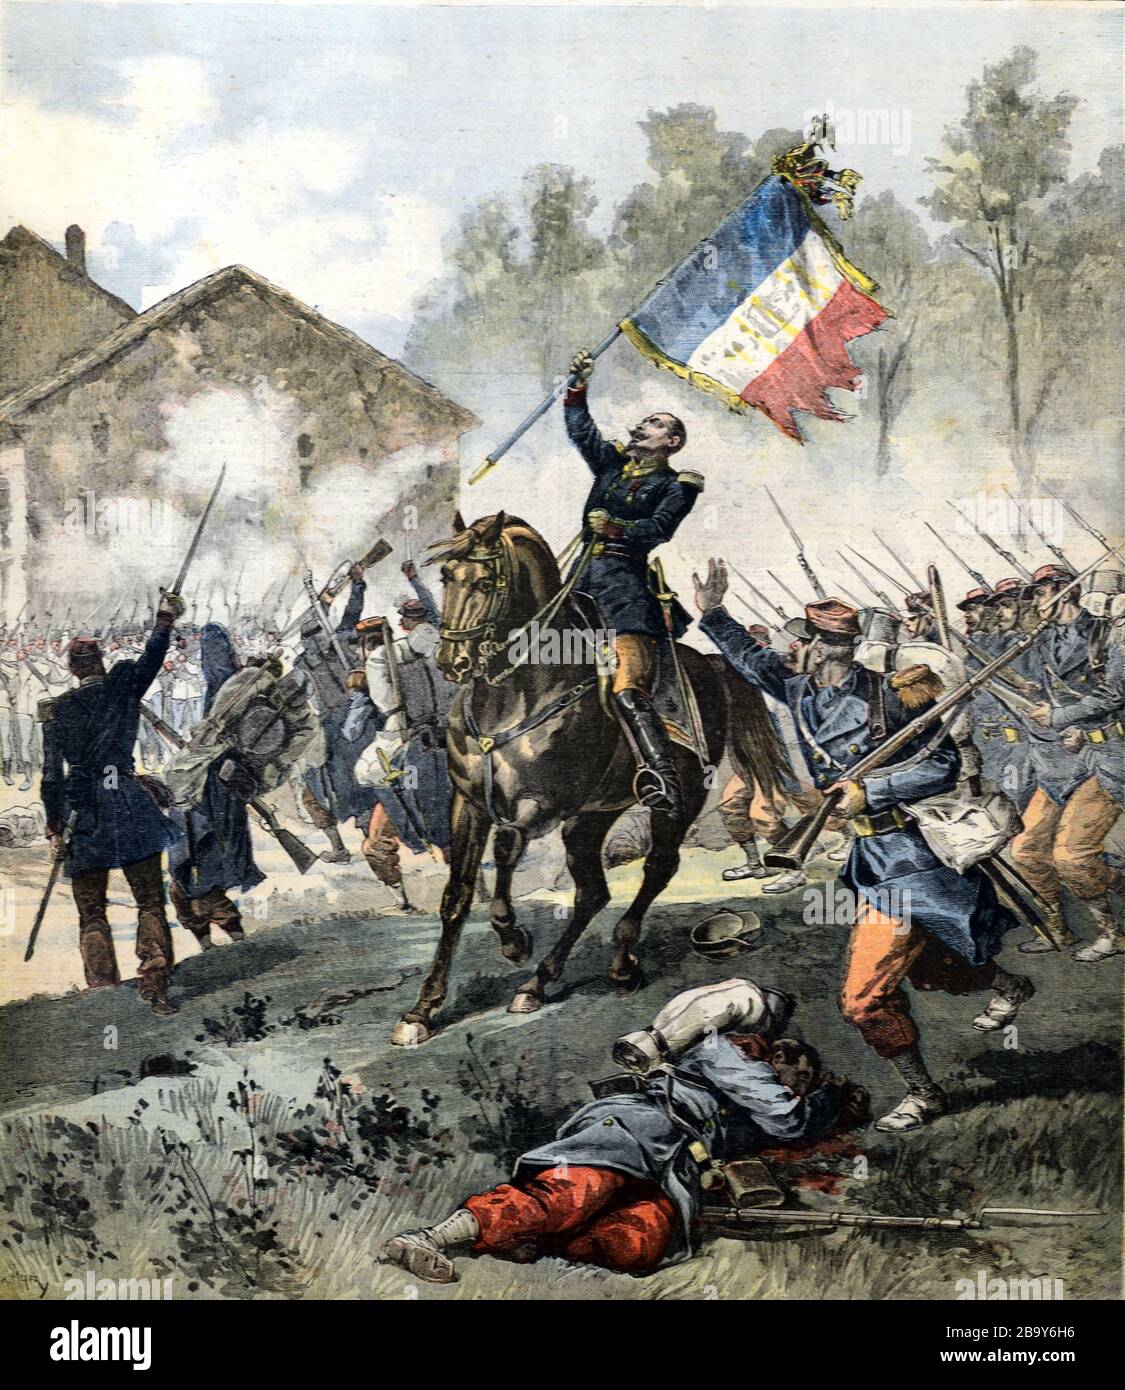 French Army or Troops during the Battle of Solferino & San Martino (24 June 1859), part of the Second Italian War of Independence. The Battle was a Victory for the Franco-Sardinia Alliance against the Austrian Army. Located in the Kingdom of Lombardy-Venetia. Vintage or Old Illustration Stock Photo